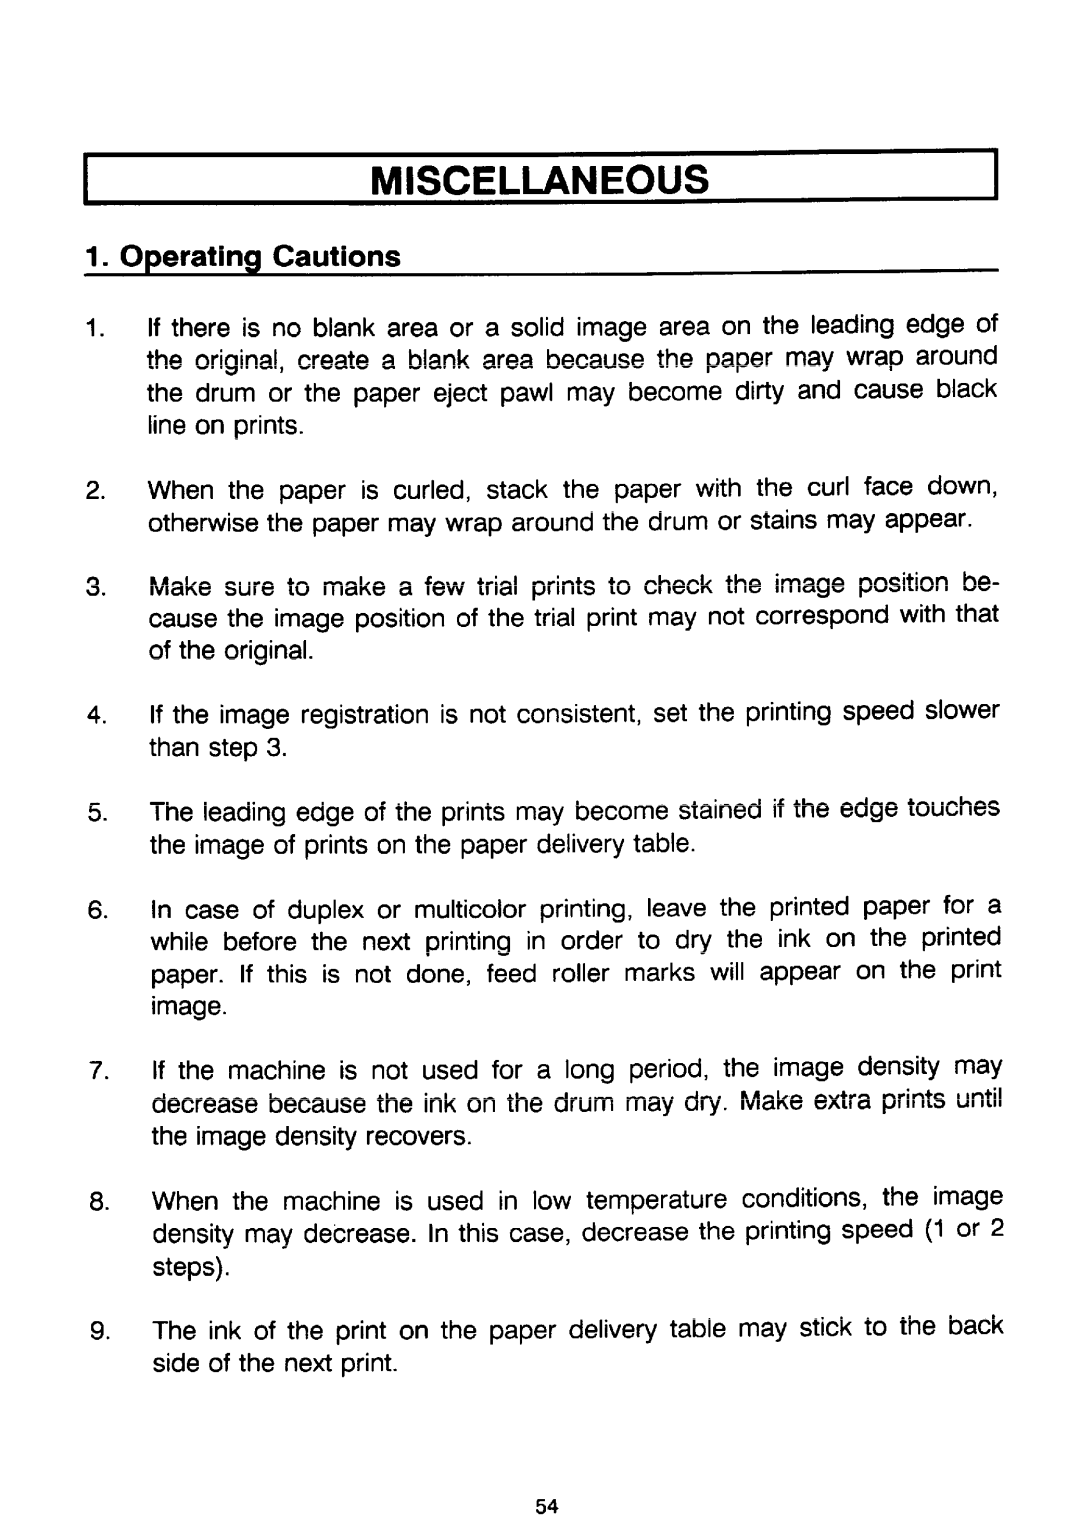 Ricoh PRIPORT VT2130 manual Imiscellaneous, Operating Cautions 